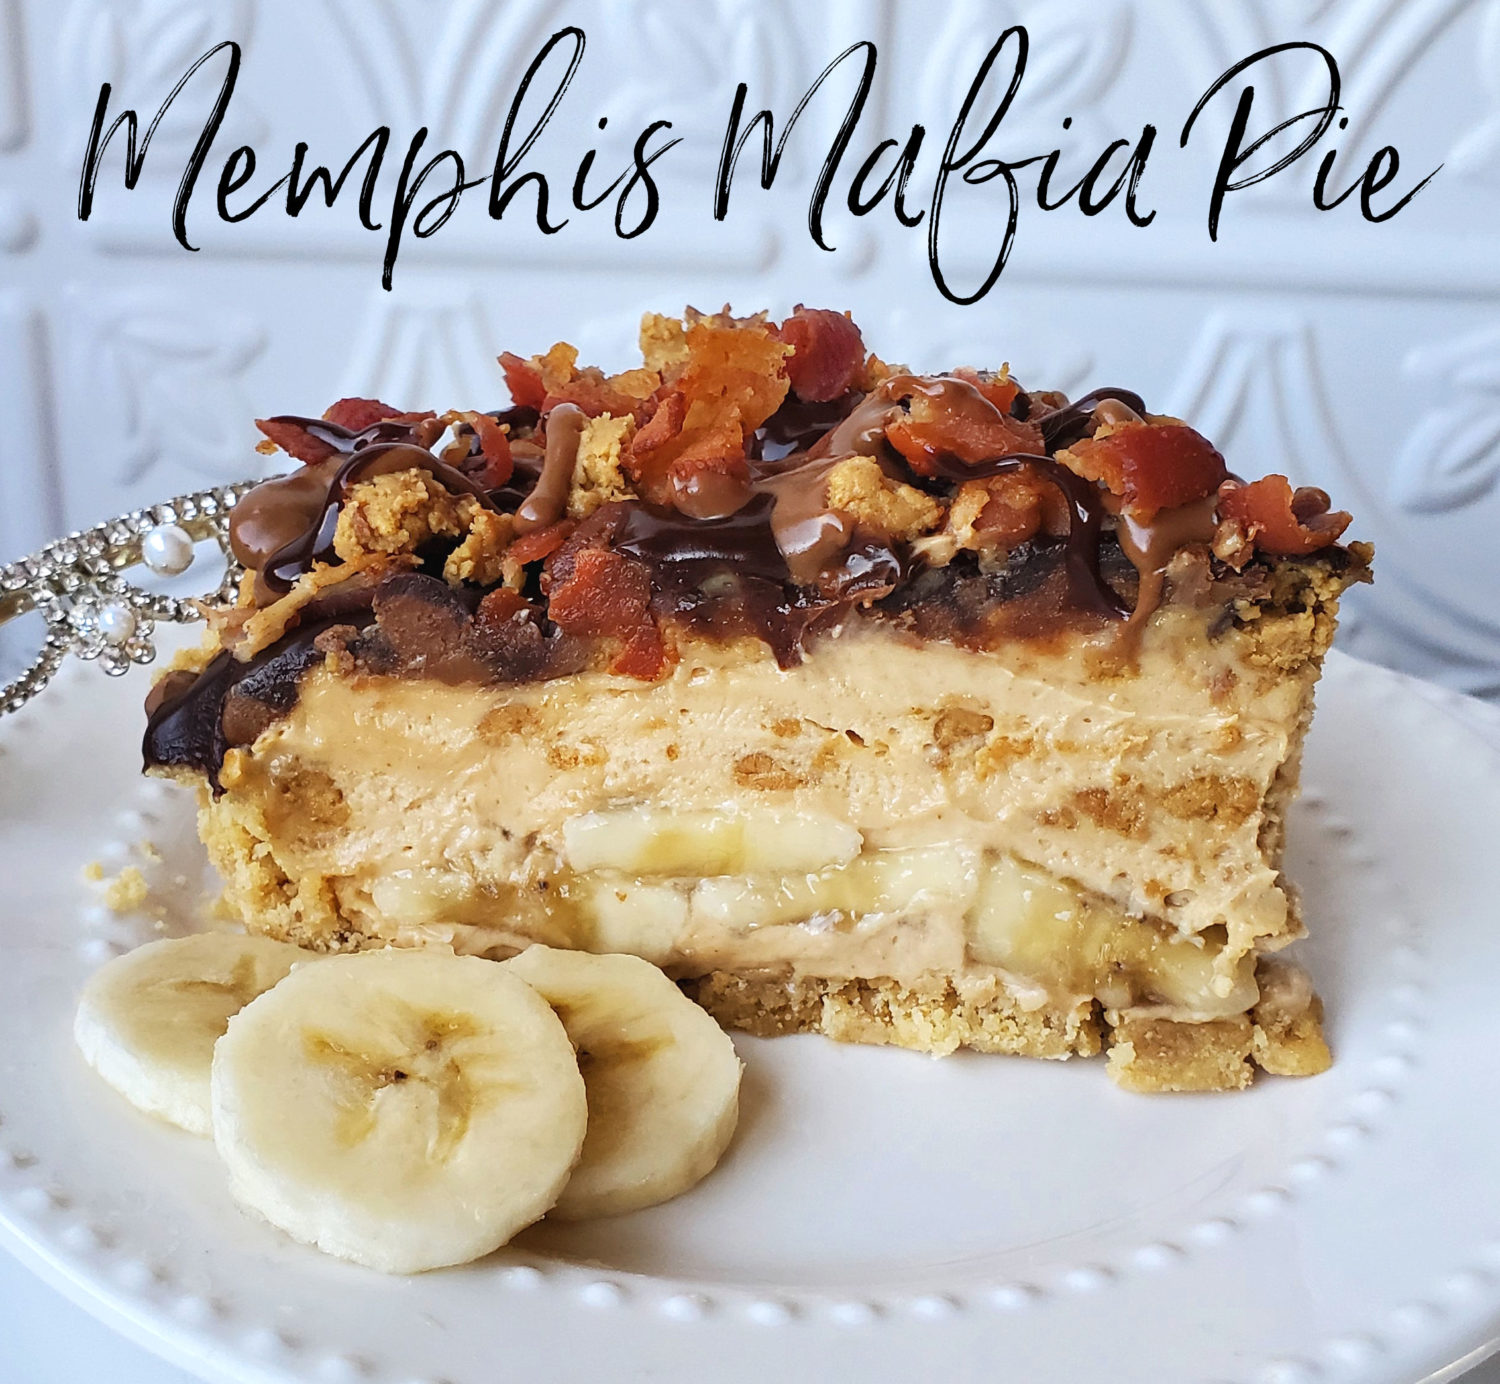 Memphis Mafia Pie: Vanilla wafer crust, peanut butter filling, bananas, homemade "Reeses" crumbles, drizzled with peanut butter fudge, chocolate ganache & bacon! 